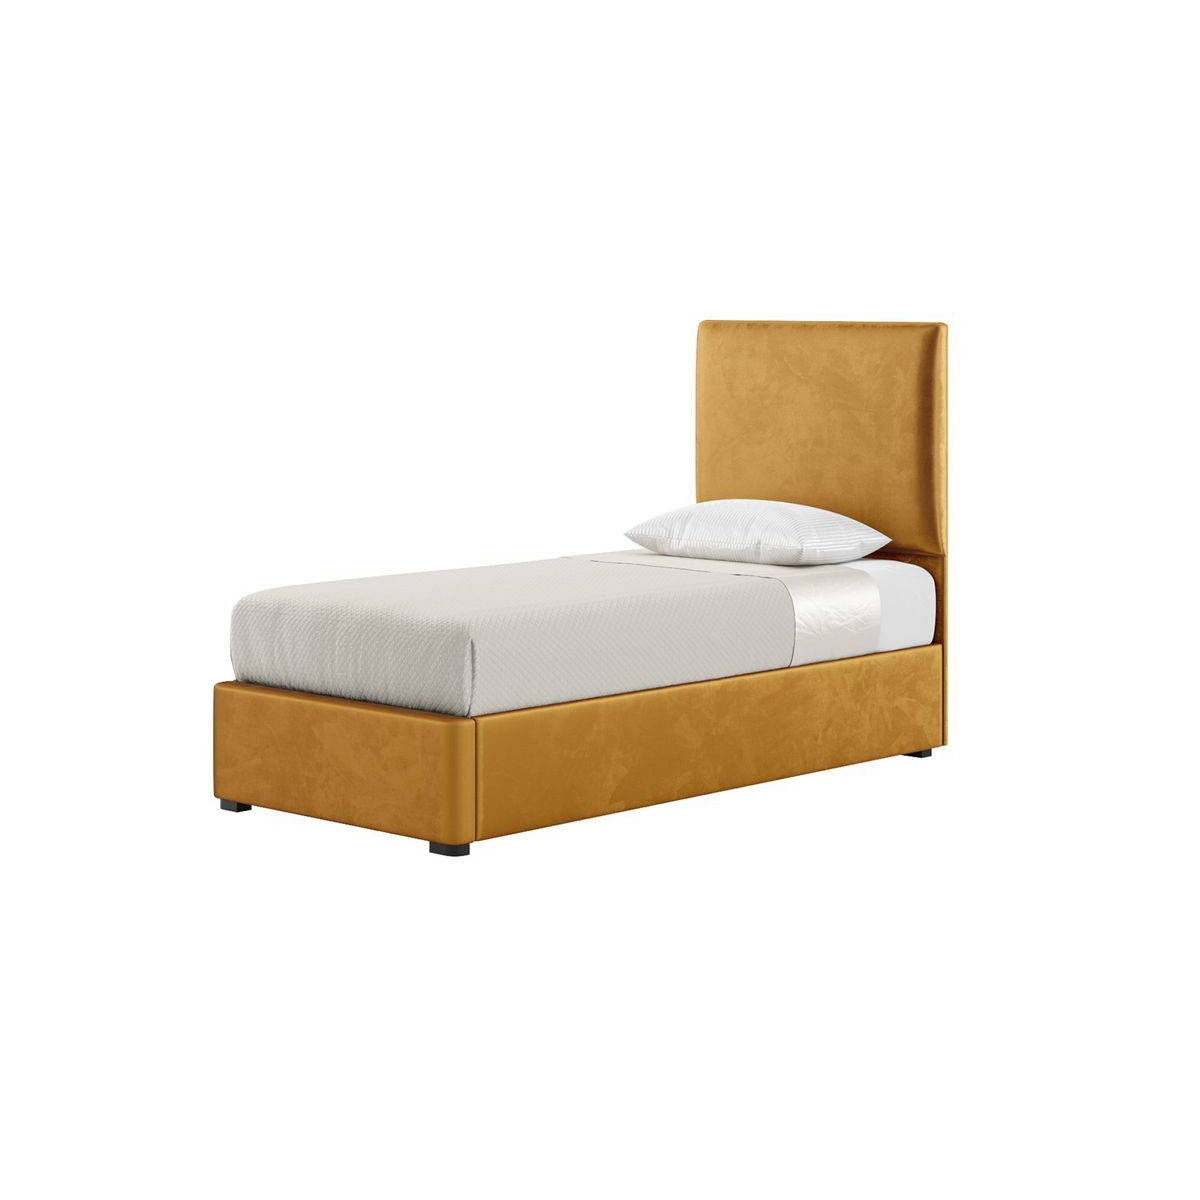 Darcy 3ft Single Bed Frame With Modern Smooth Headboard, mustard, Leg colour: black - image 1